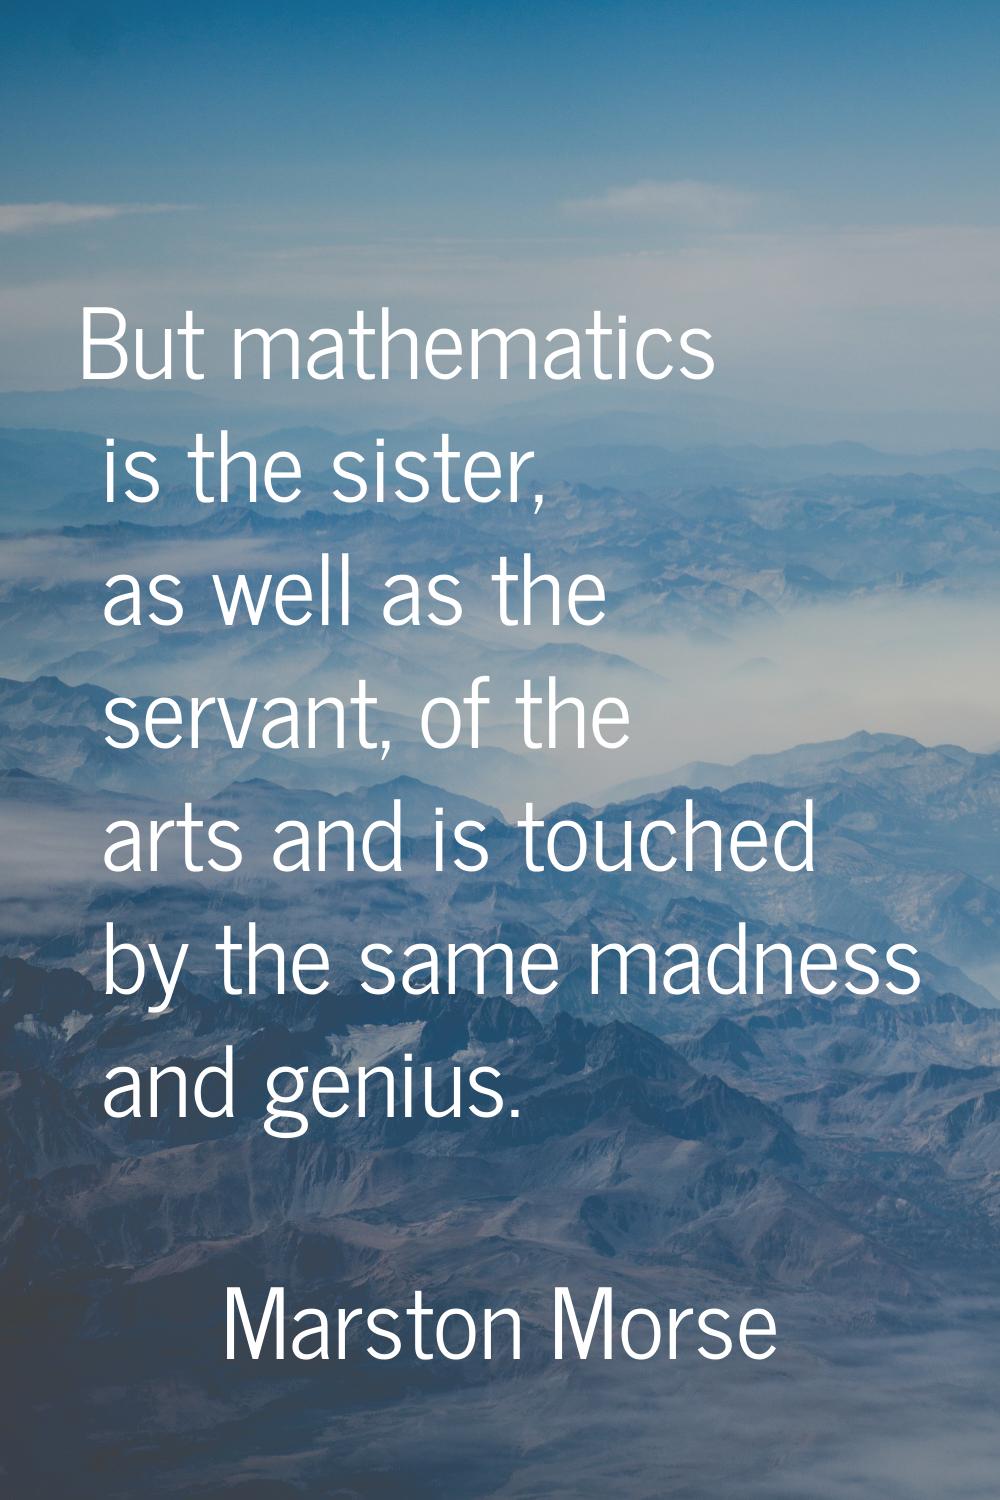 But mathematics is the sister, as well as the servant, of the arts and is touched by the same madne